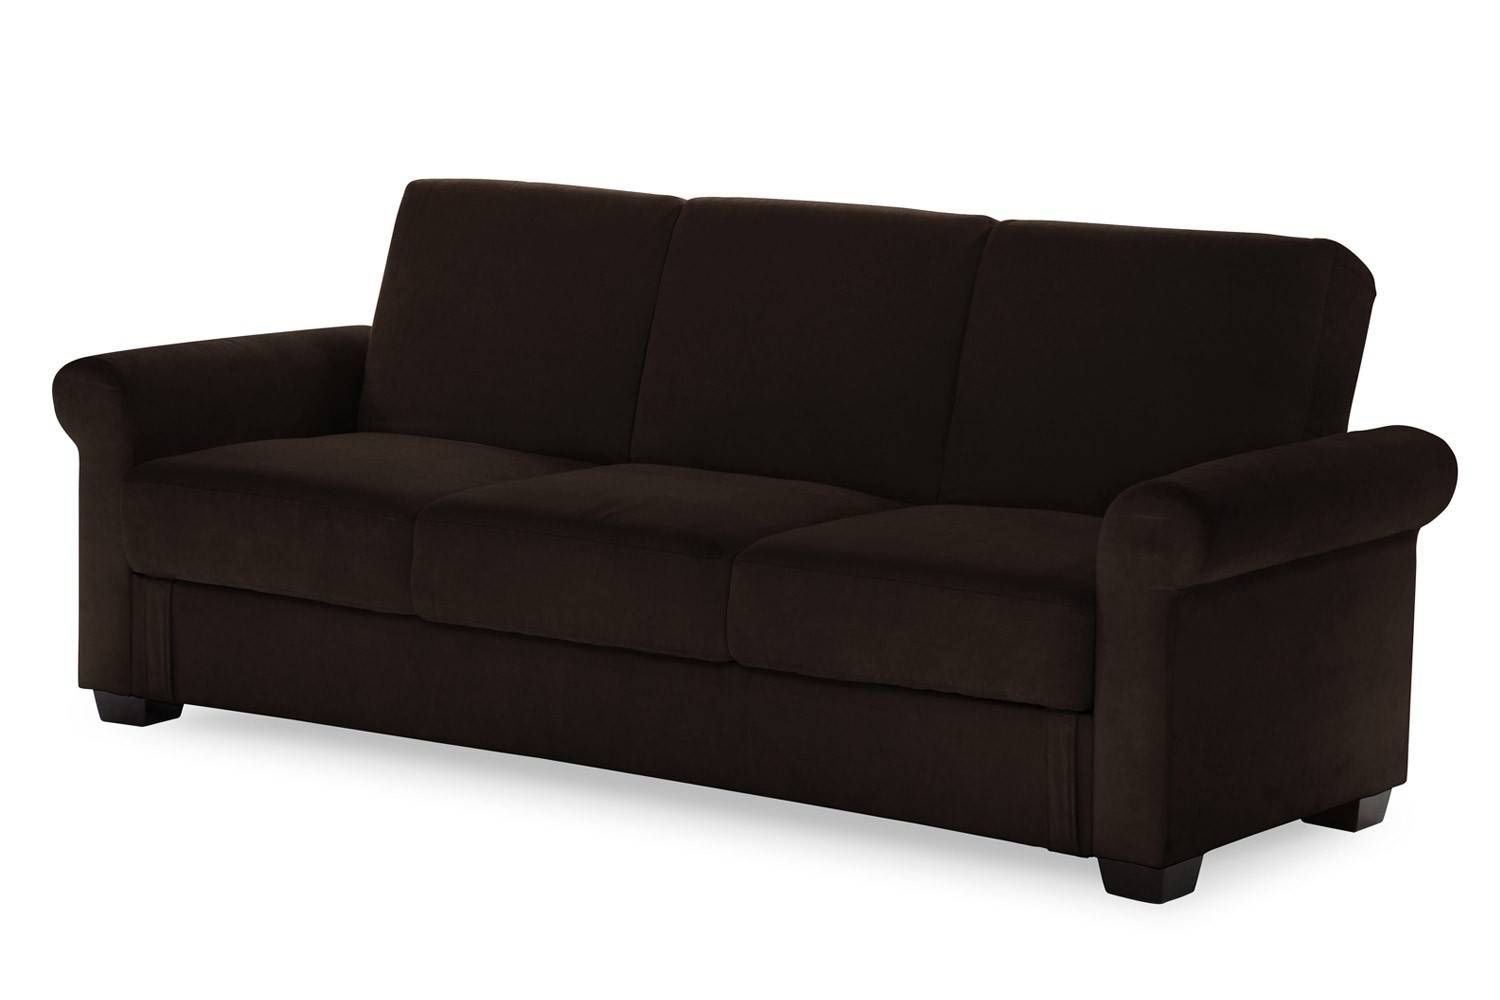 Thomas Convertible Sleeper Futon Bed | Brown Sleeper Sofa | The With Regard To Full Size Sofa Beds (Photo 9 of 15)